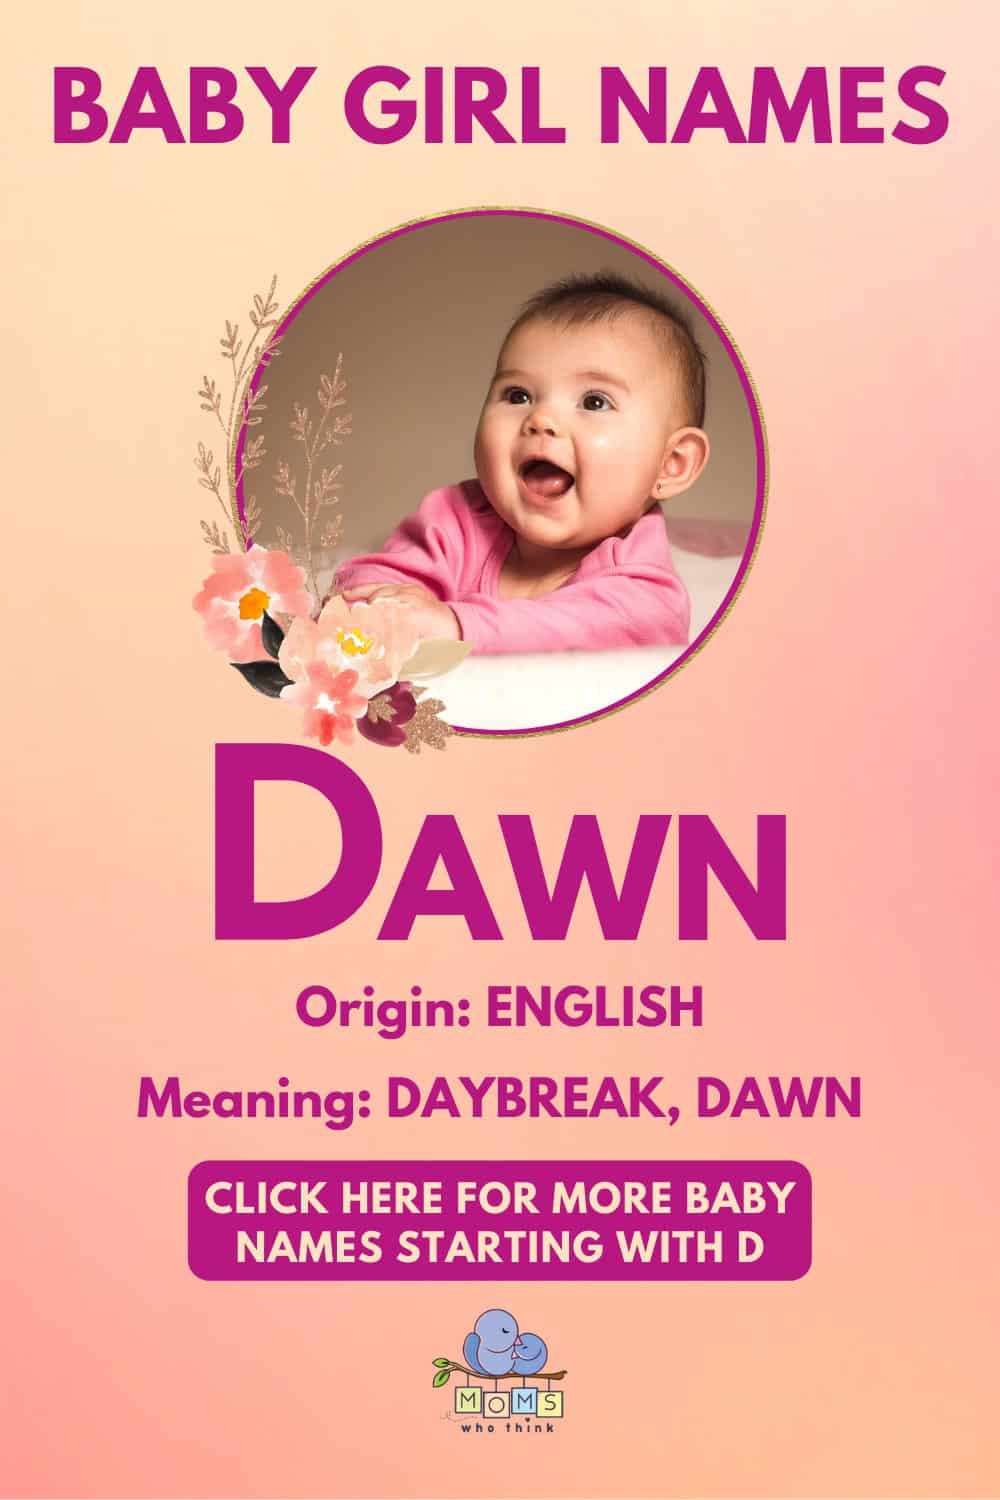 Baby girl name meanings - Dawn